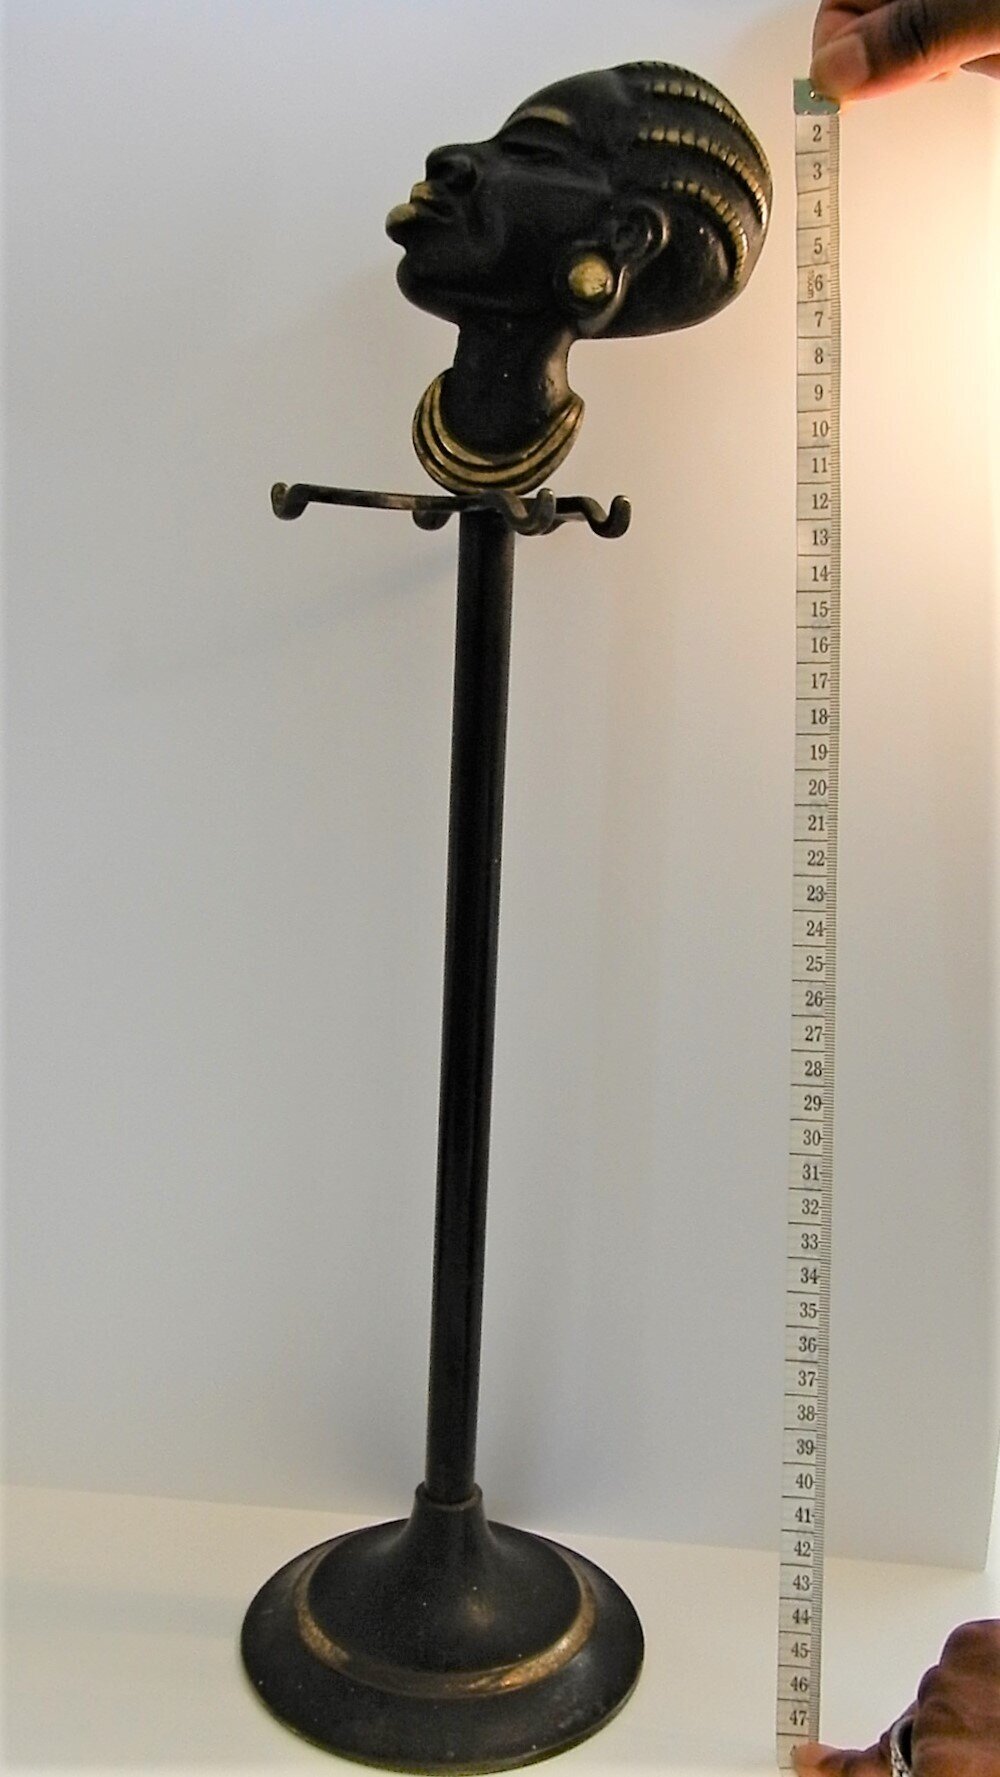  A black fire iron set holder showing the tall stand. Towards the top of the stand are four hooks, arranged radially around the stand. At the top there is a sculpture of a Black woman in profile. Her fours braids, eyebrows, lips and necklace are pain